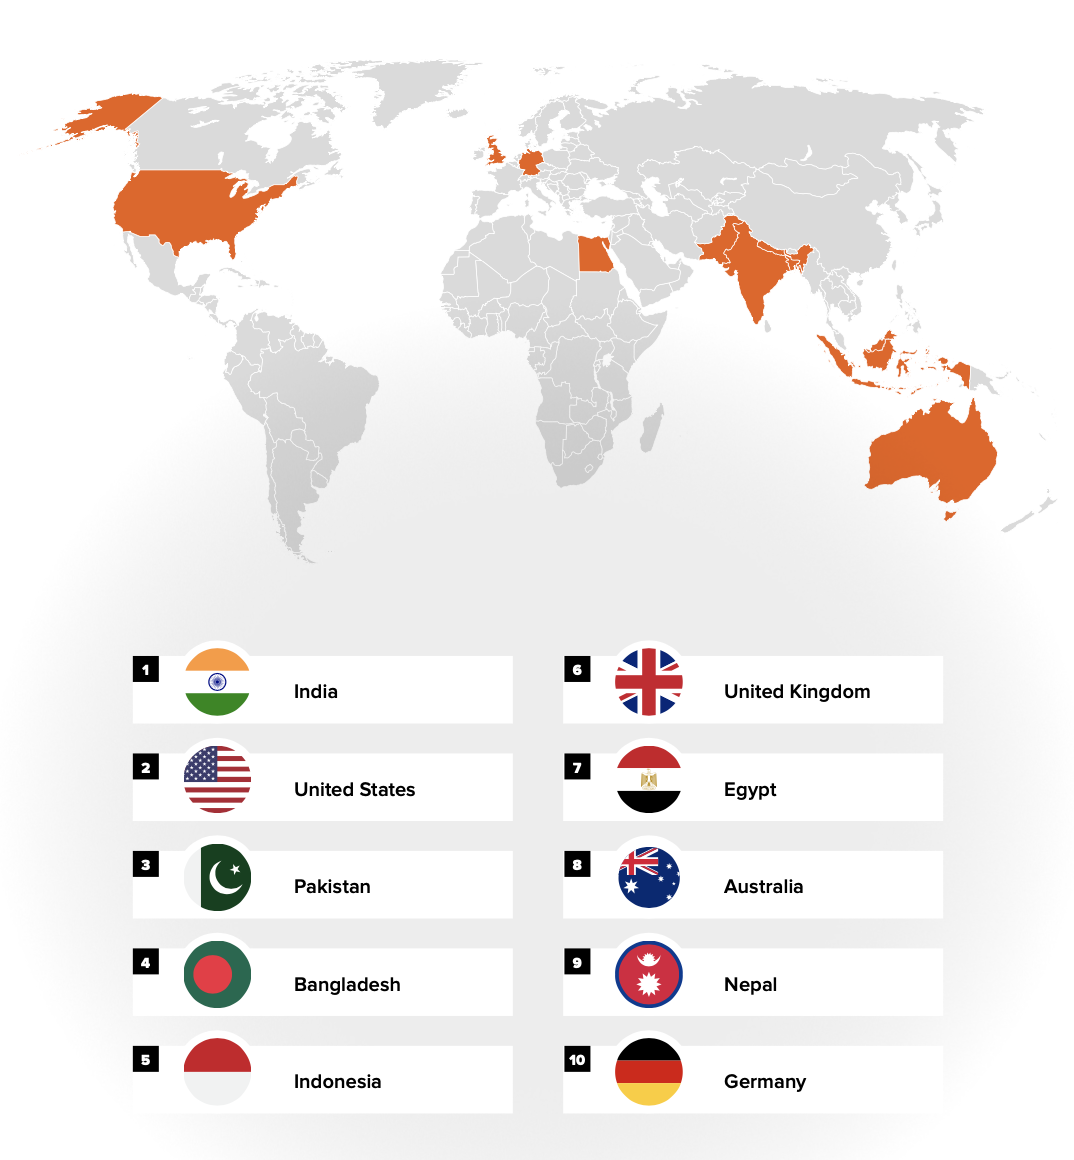 Top 10 countries where respondents report living